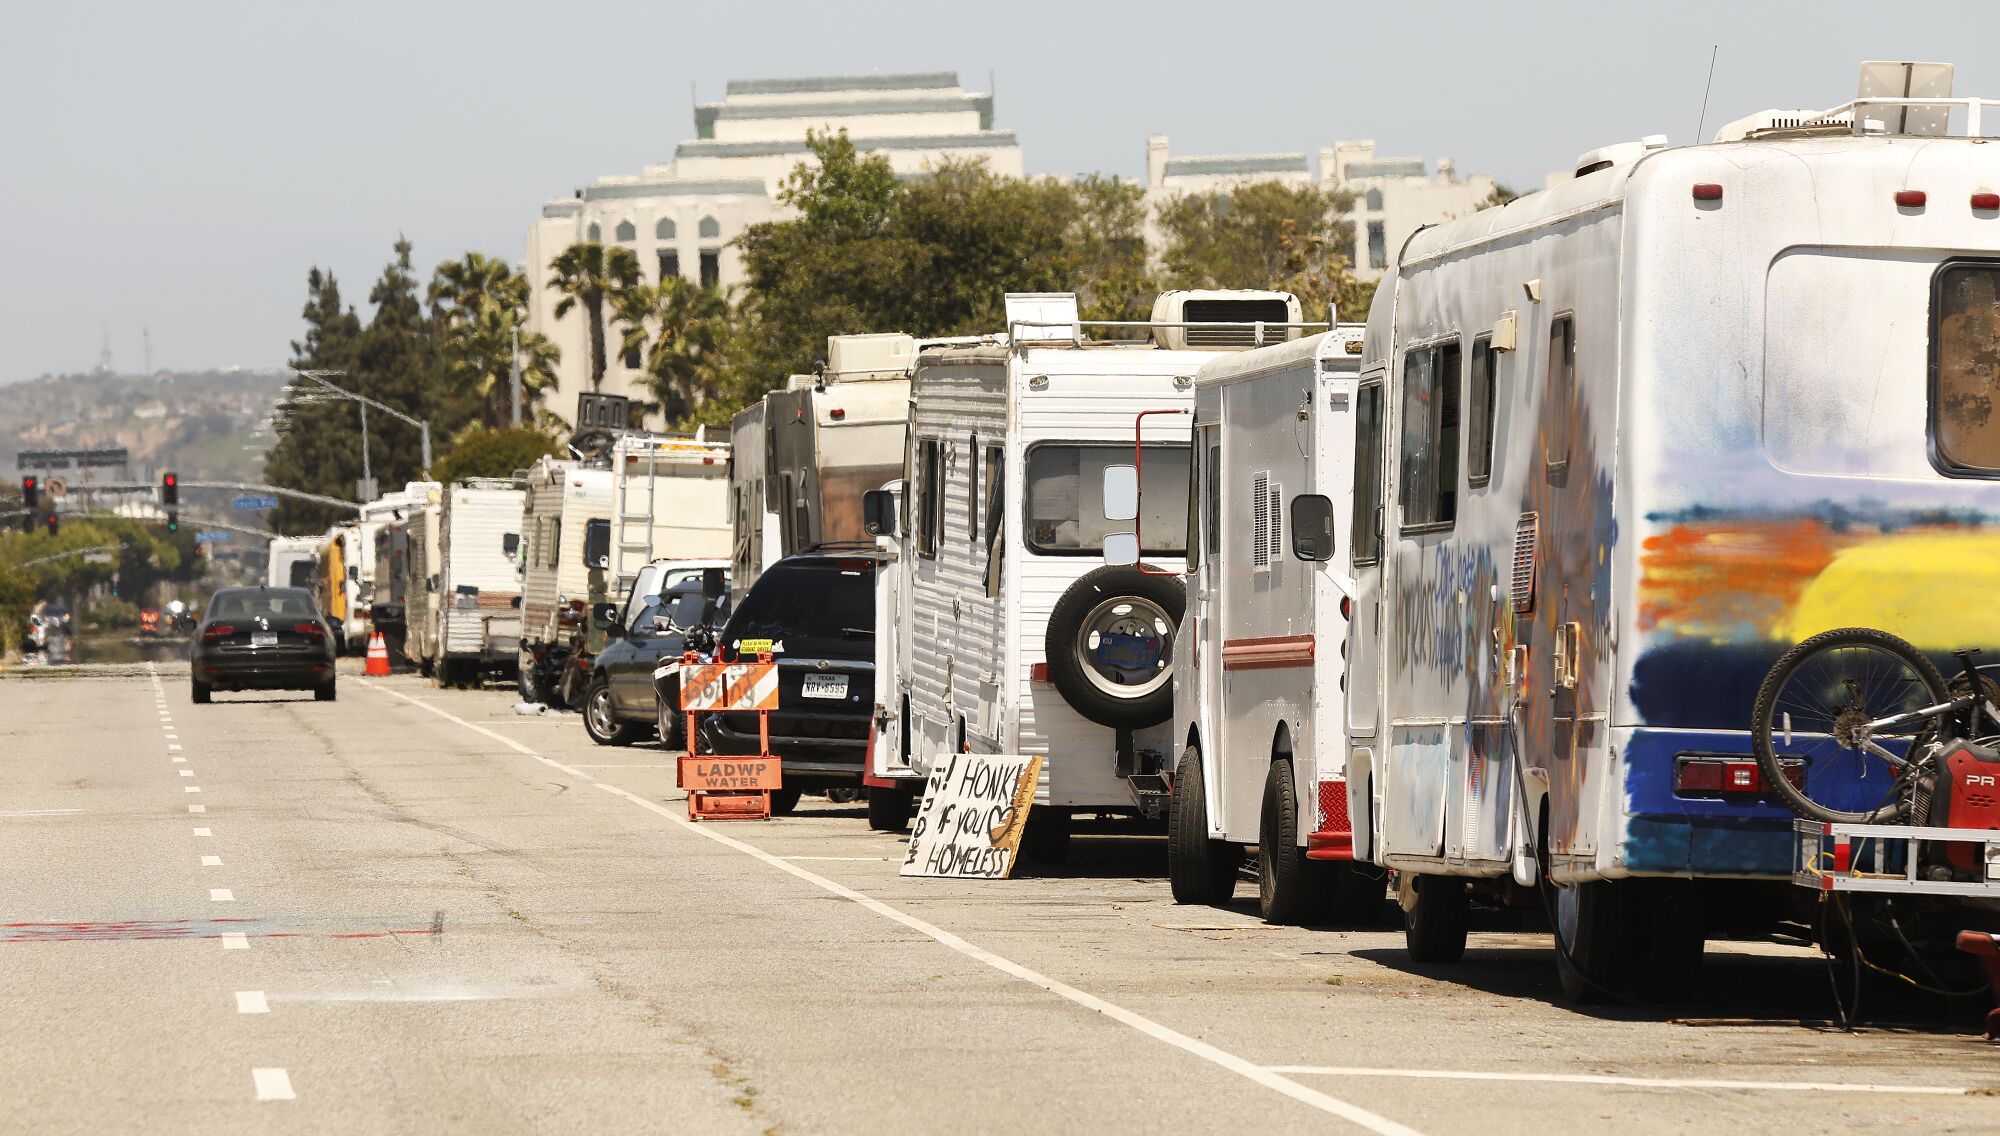 Campers are parked along West Jefferson Boulevard near the Ballona Wetlands.